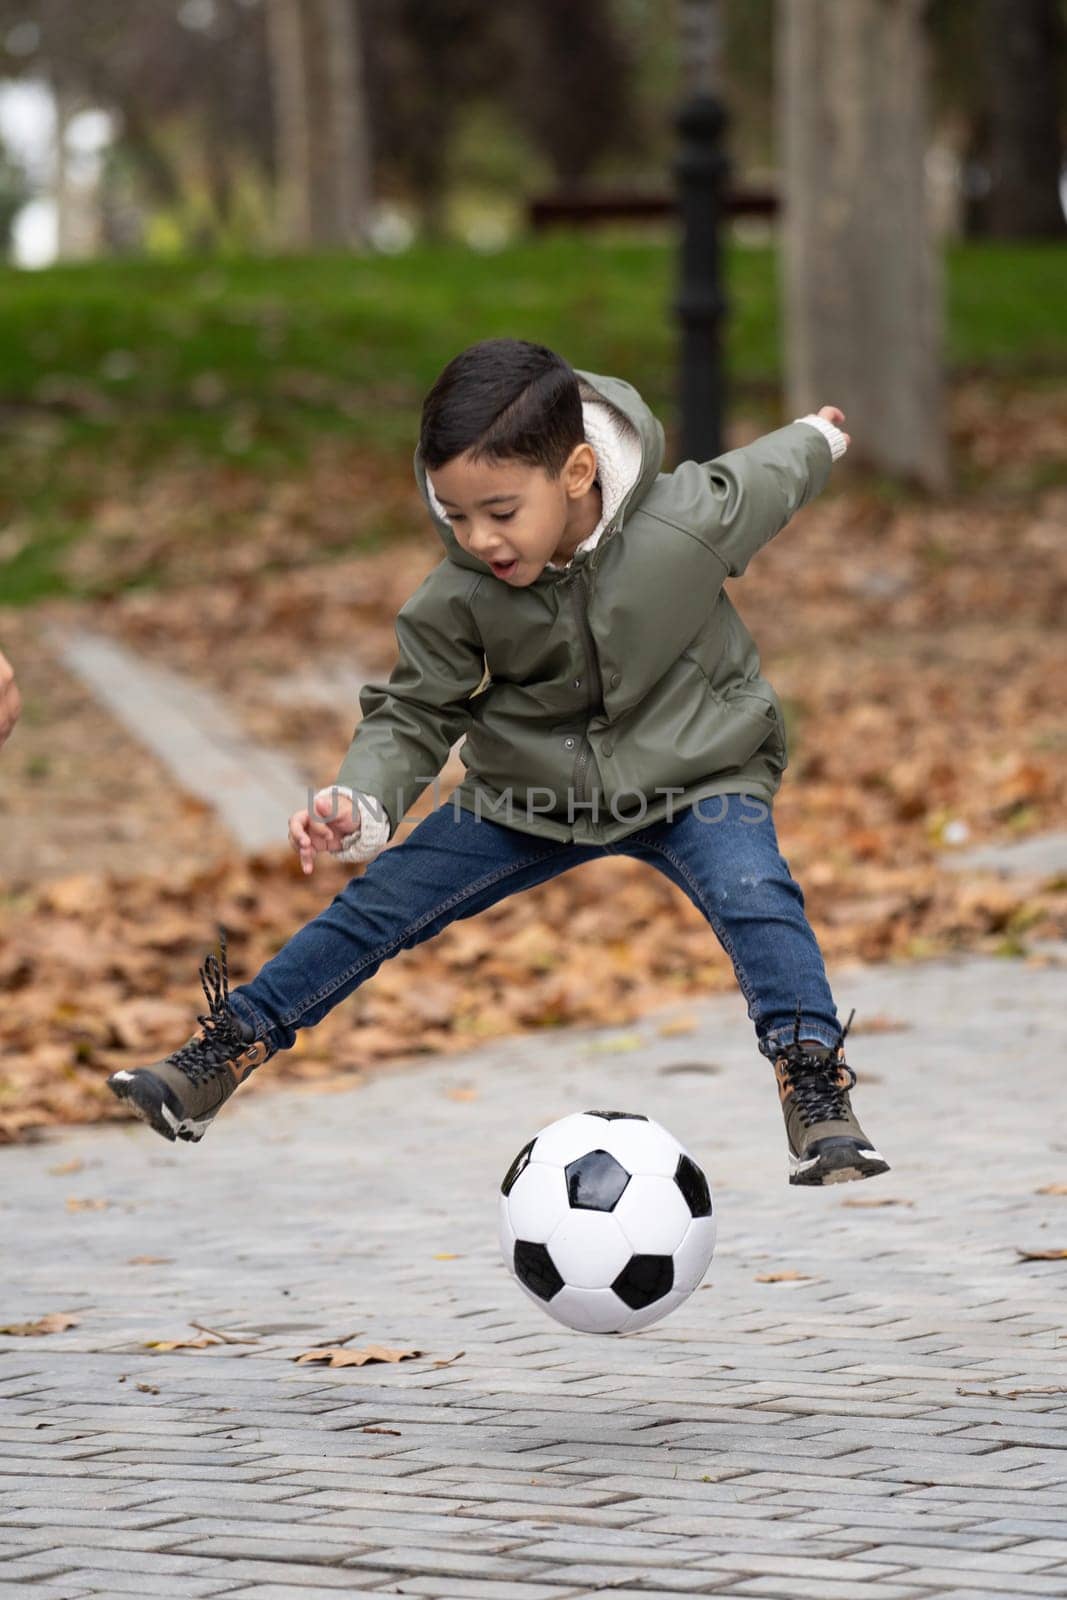 Happy kid with soccer ball jumping outdoors in a public park by papatonic